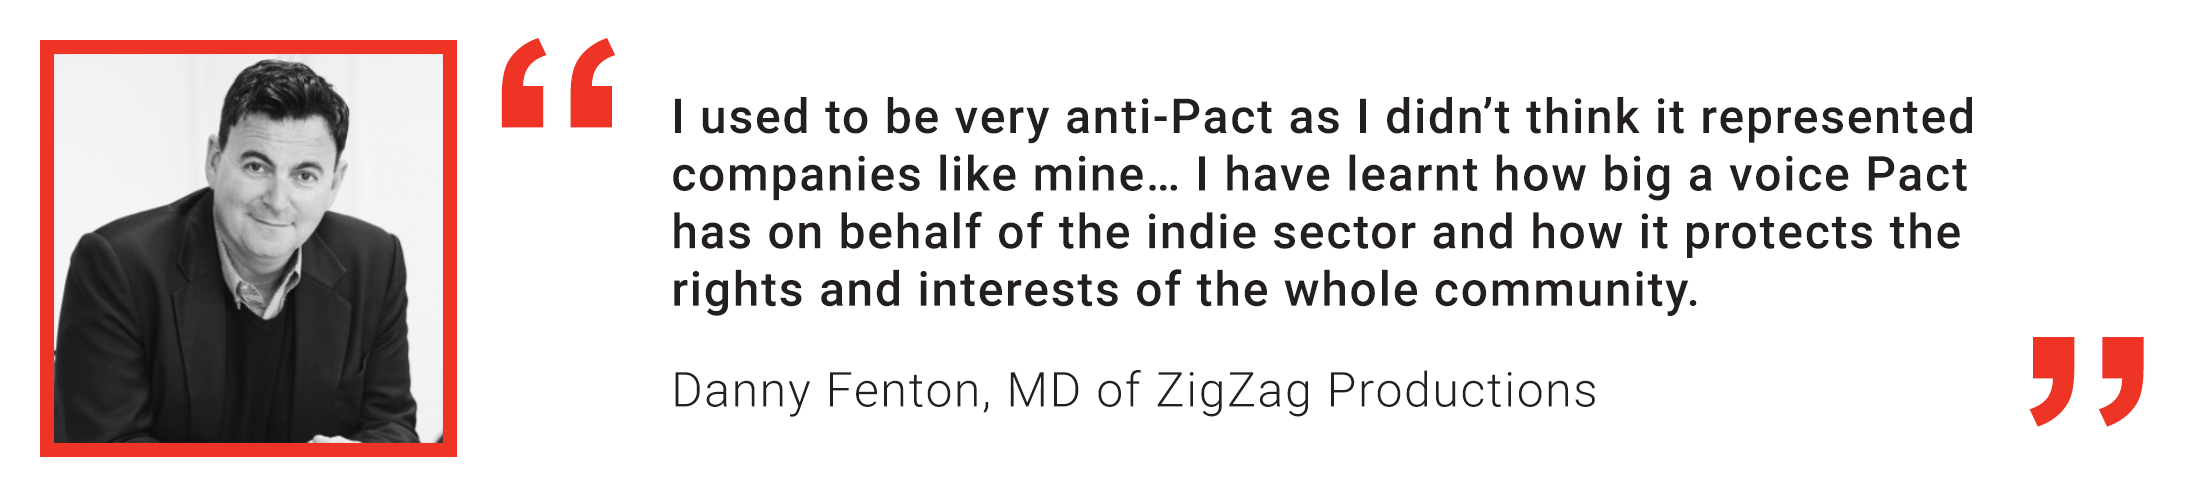 Danny Fenton, Pact Member Quote: I used to be very anti-Pact, as I didn't think it represented companies like mine...